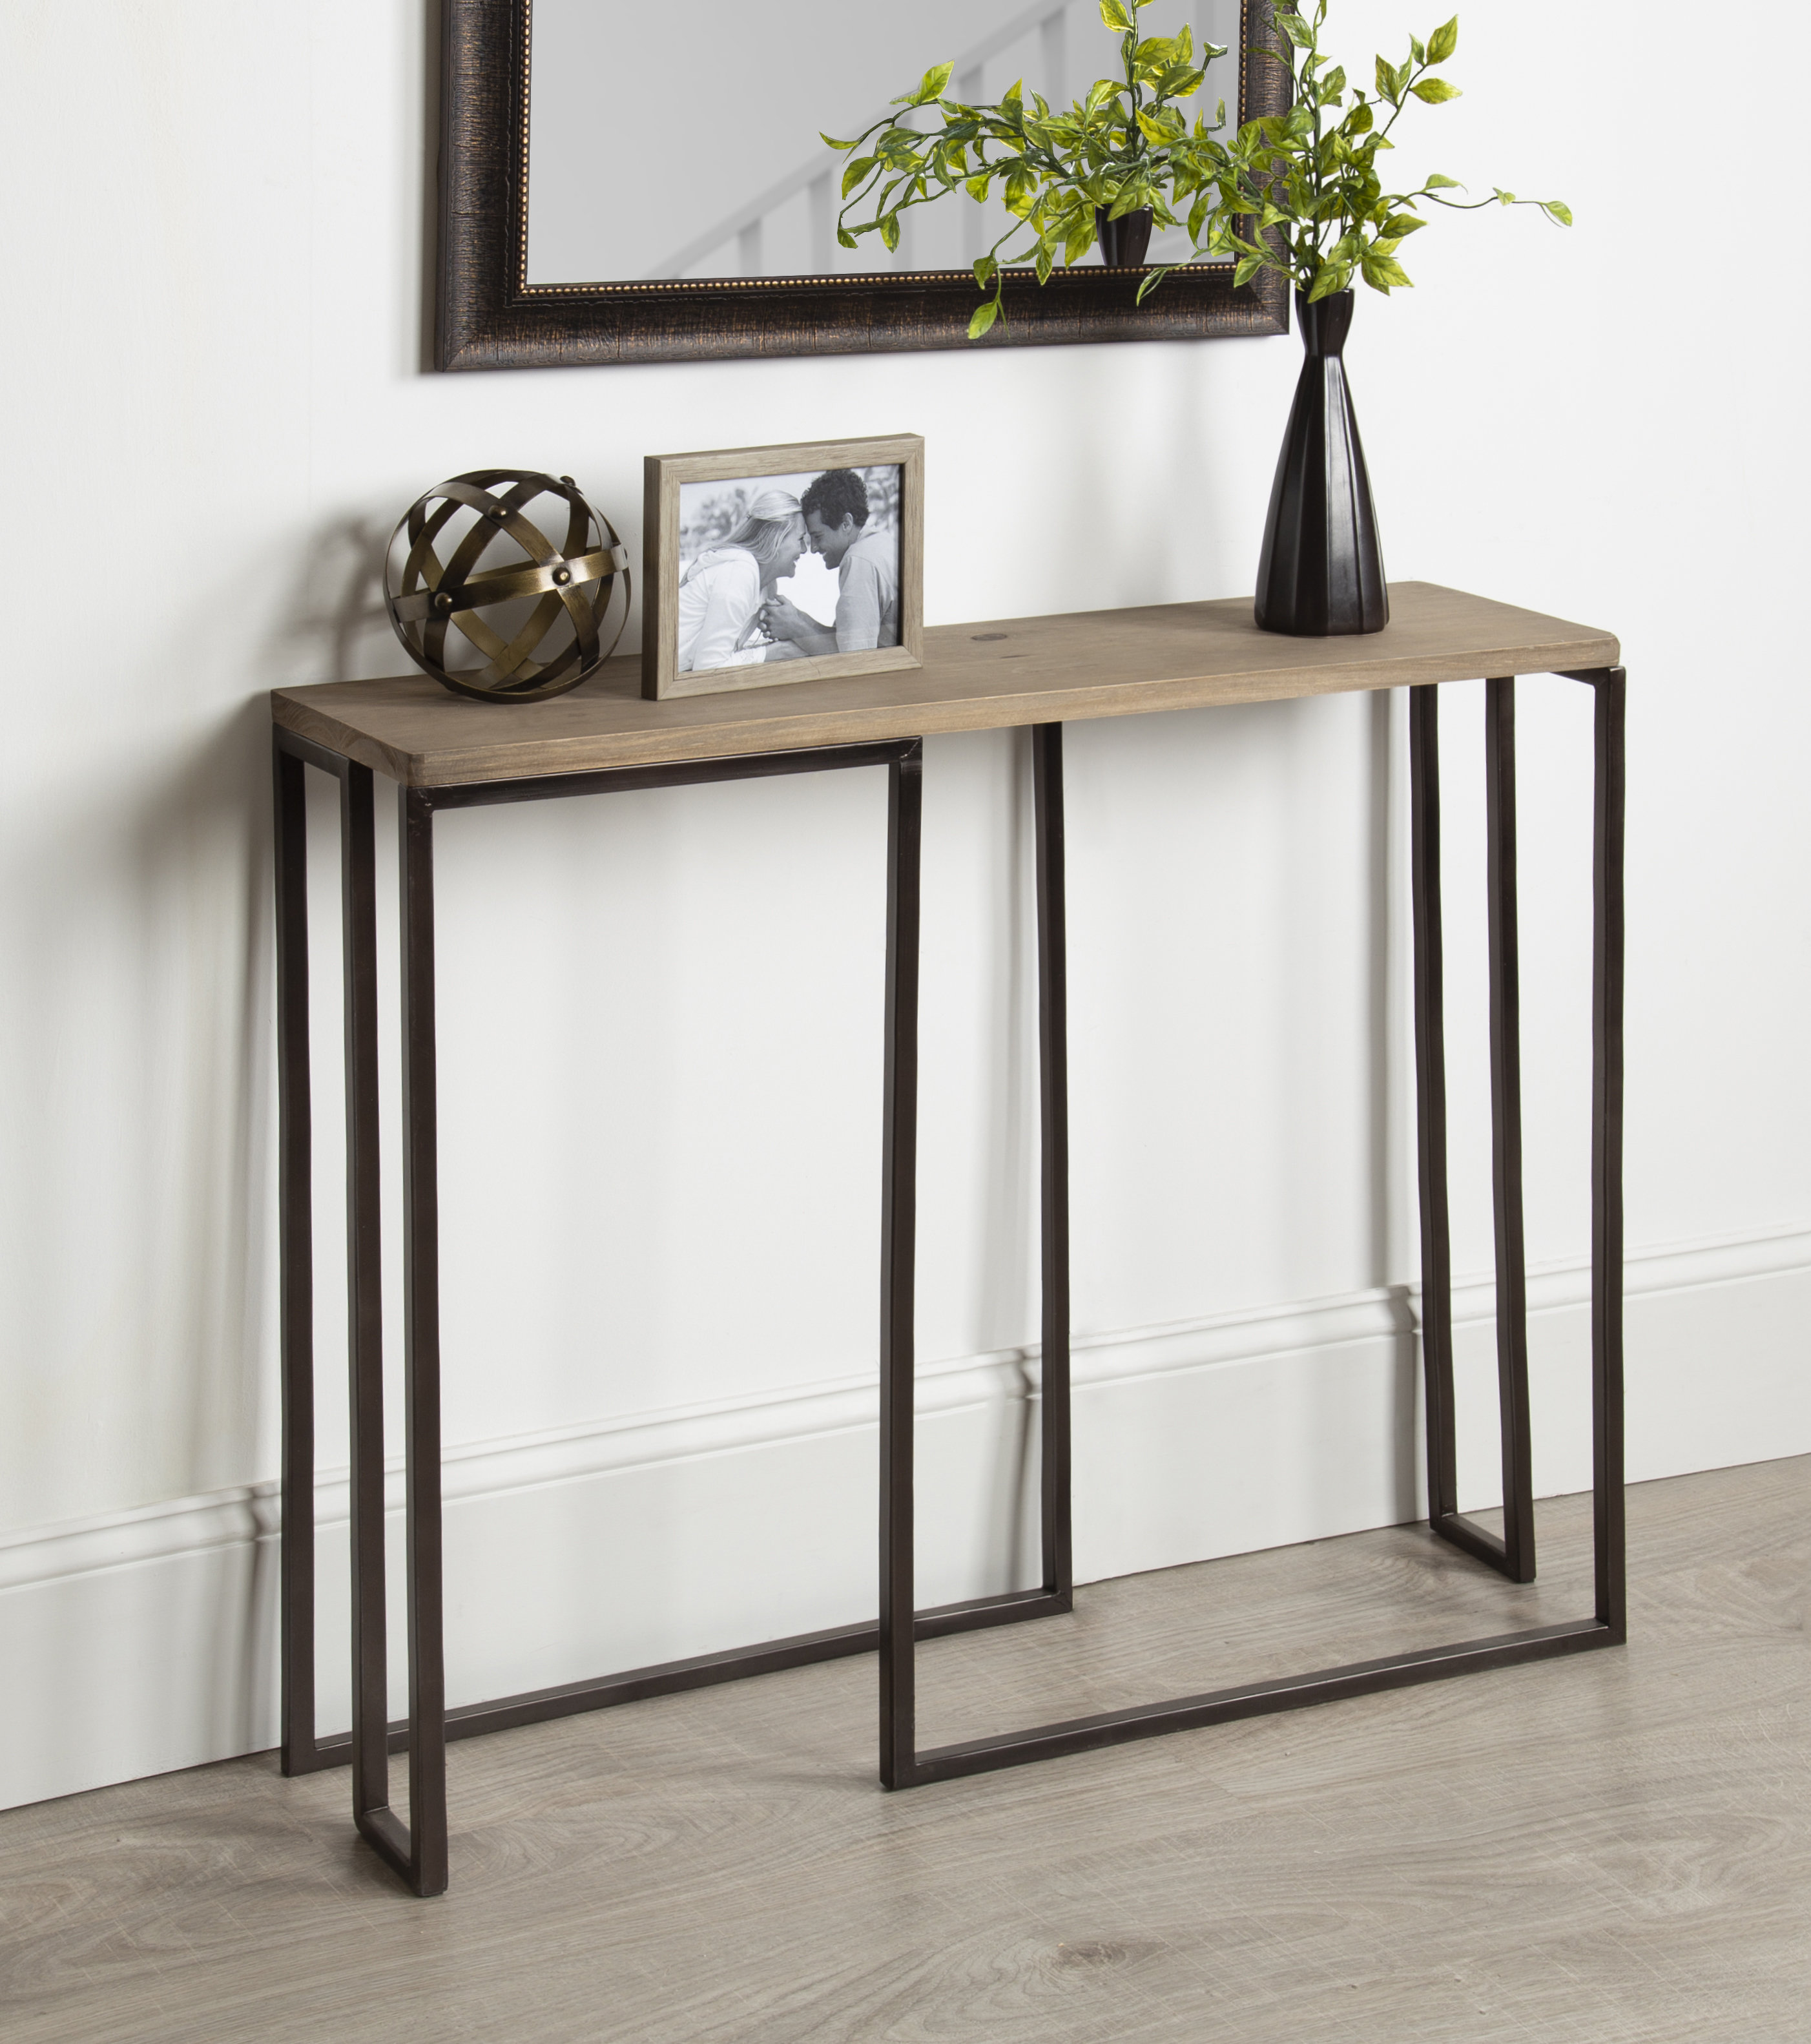 small corner console table slim thin accent laminate floor trim cast aluminum patio furniture garden sets gaming dock off white coffee dining room tables target black bone inlay